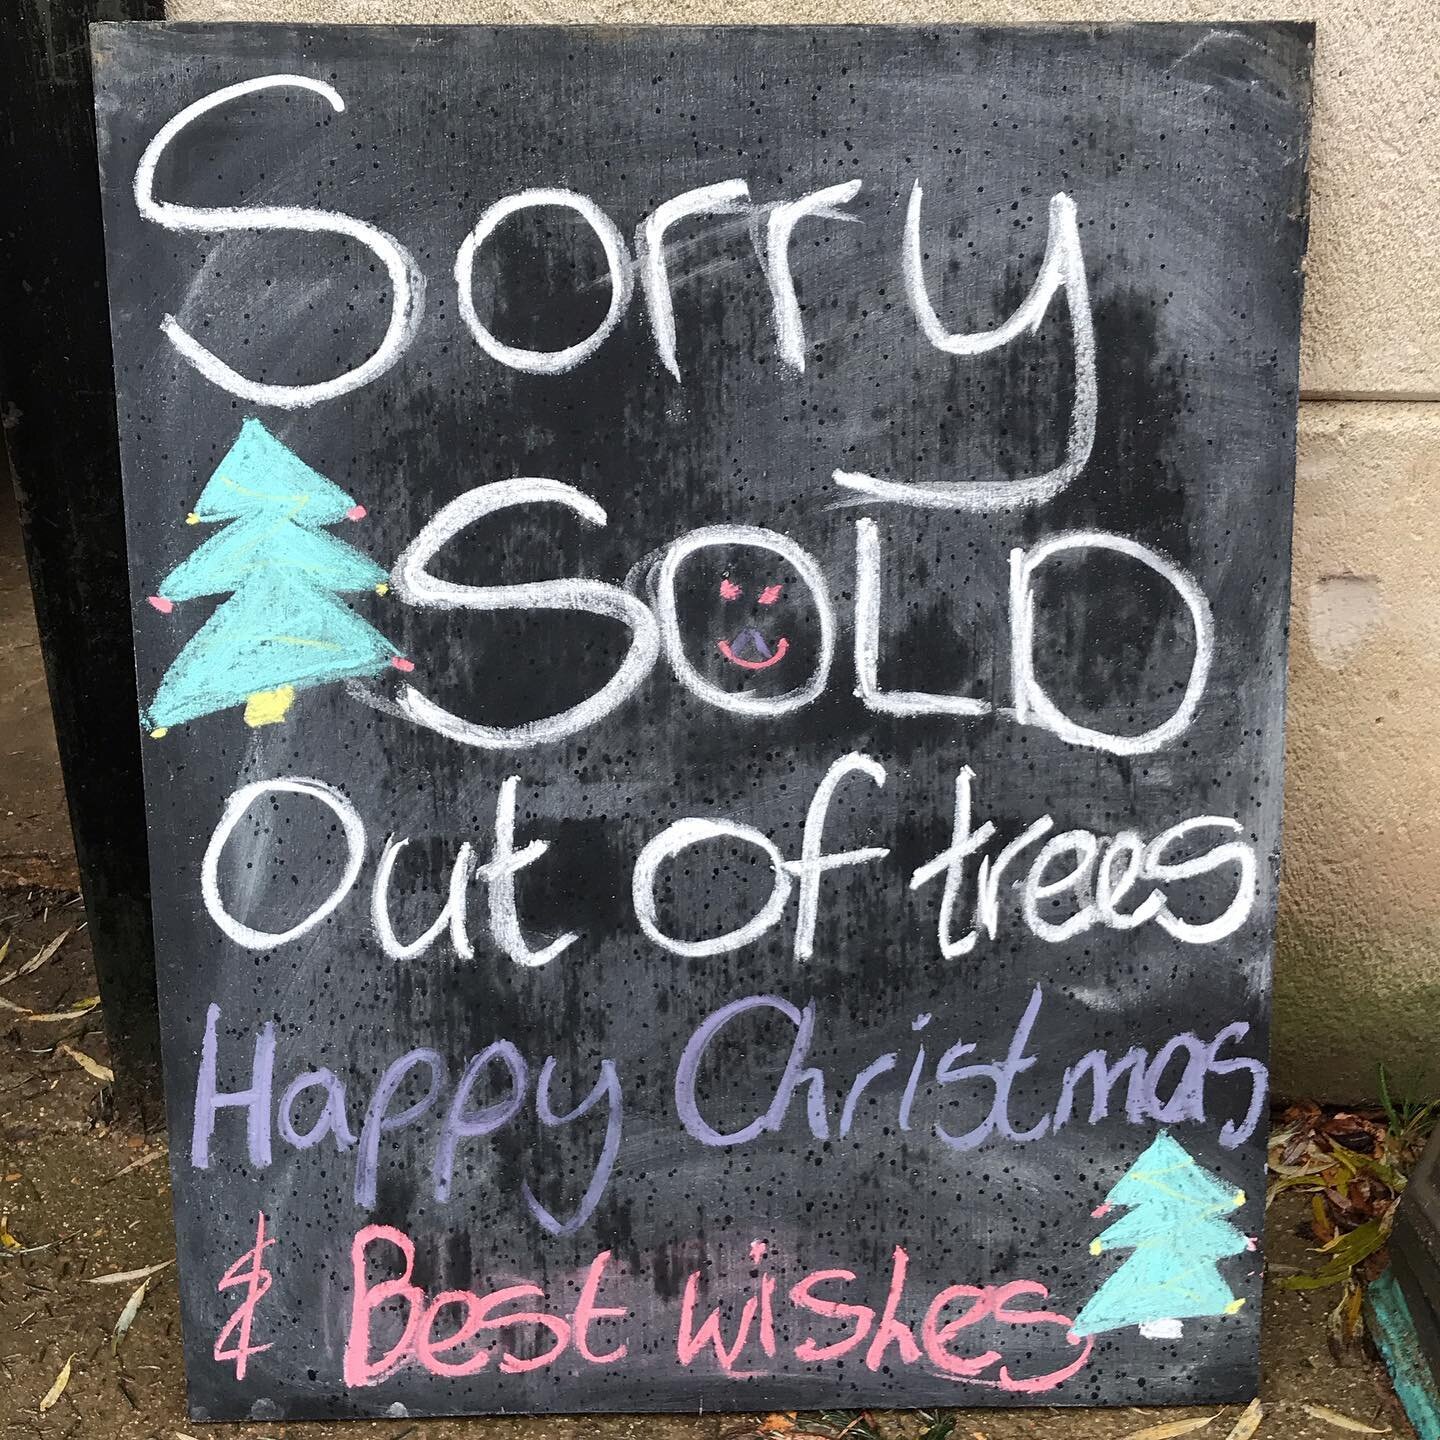 Well that&rsquo;s all done for another year 🎄🎄🎄🎄
What a record 2 weeks.. 
#localfarmers #christmastree #supportsmallbusiness